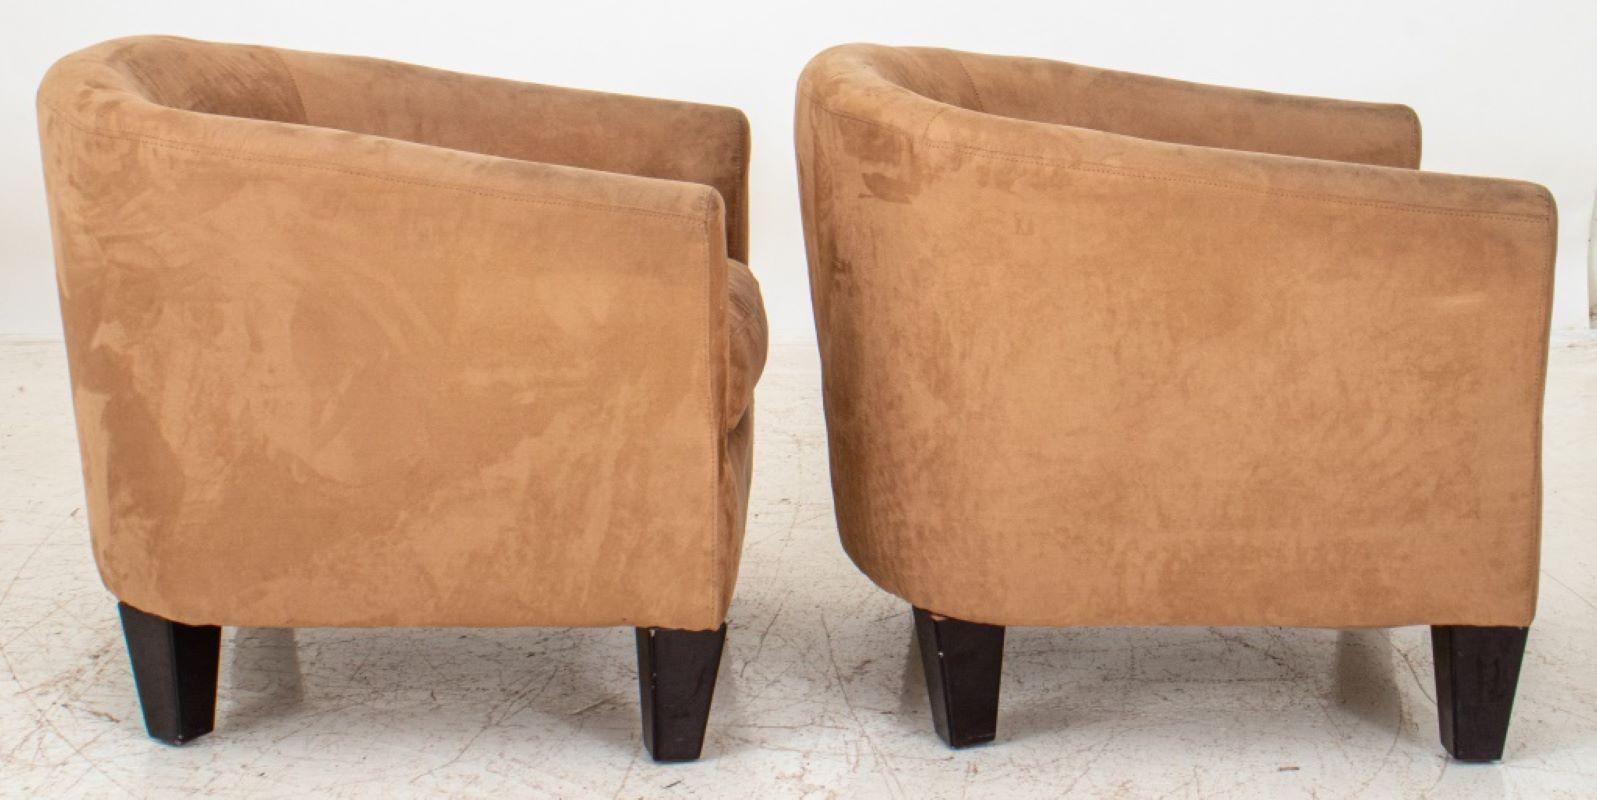 20th Century Modern Fawn Ultrasuede Tub Chairs, 2